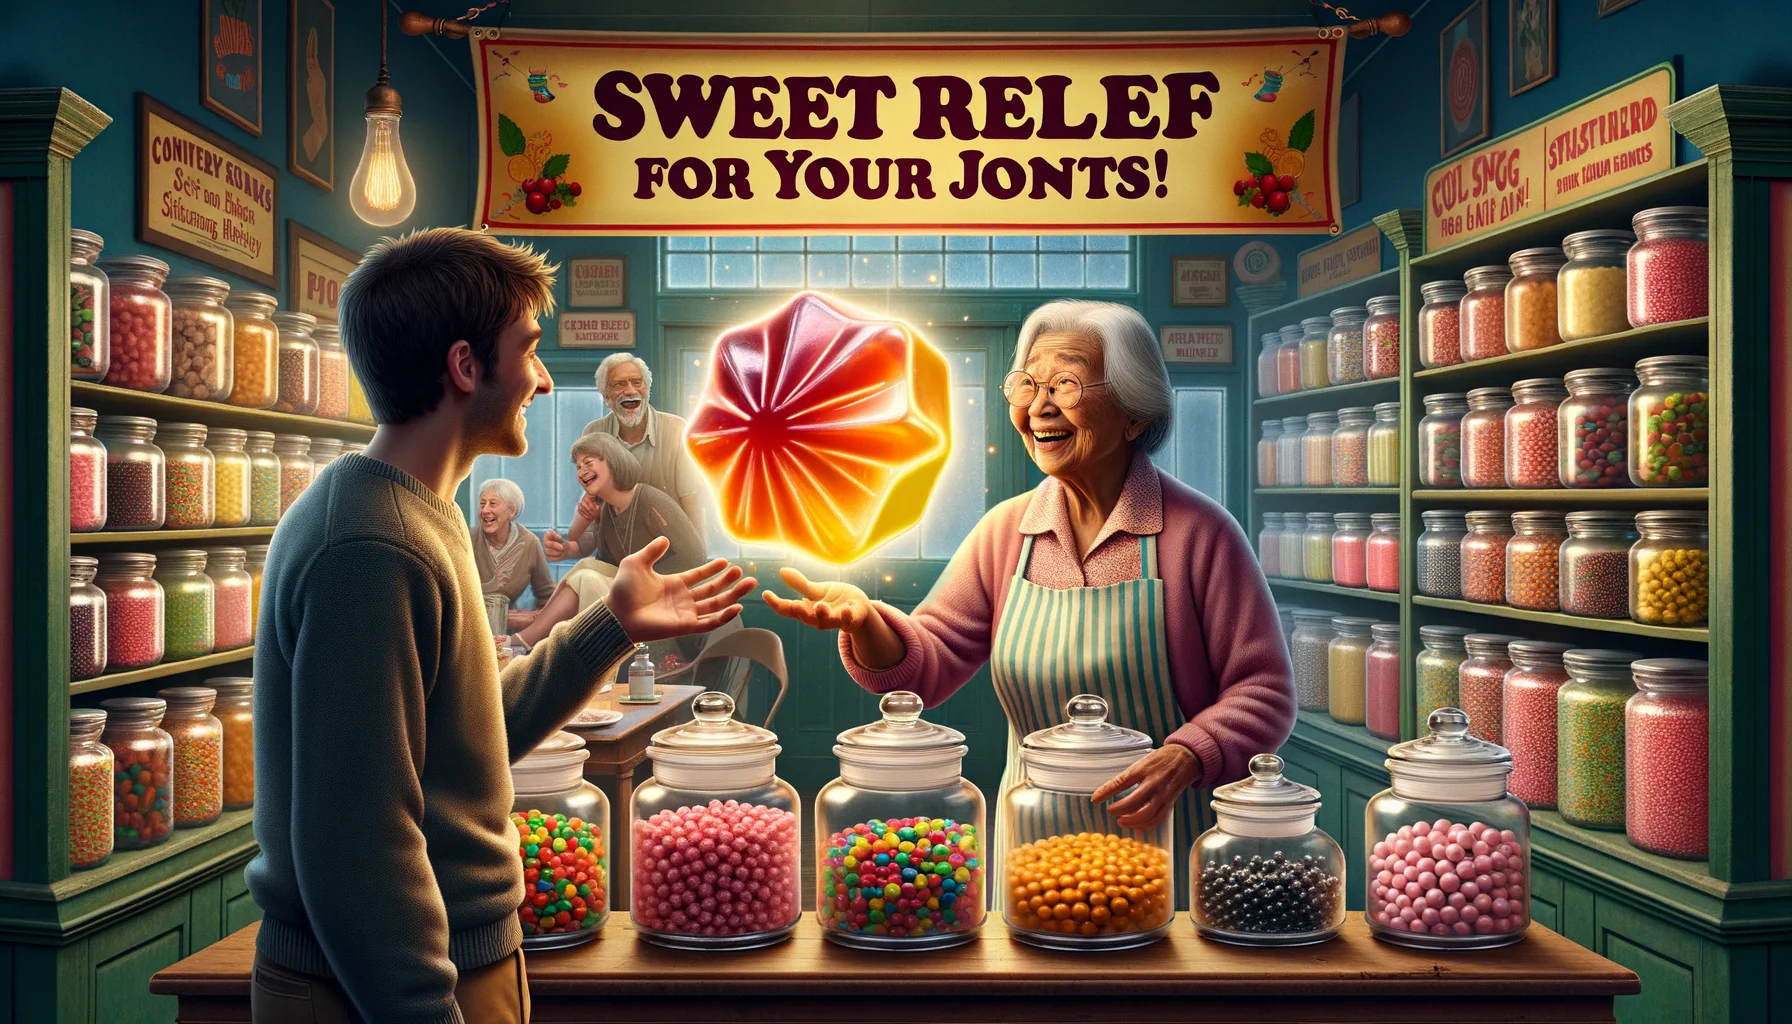 A humorous and realistic scenario where candy is being marketed for improving joint health. The setting is an old-fashioned candy store with walls lined with glass jars filled with various colorful and enticing candies. A candy shop owner, an elderly South Asian woman, and a youthful Caucasian customer are engaged in a lively conversation. The shop owner holds up a gleaming, fruit-inspired candy that glows as if imbued with magic. The tagline 'Sweet Relief for Your Joints!' is displayed prominently on the shop's banner in playful and bold letters, creating an ironical juxtaposition of childhood sweets and adult health concerns.